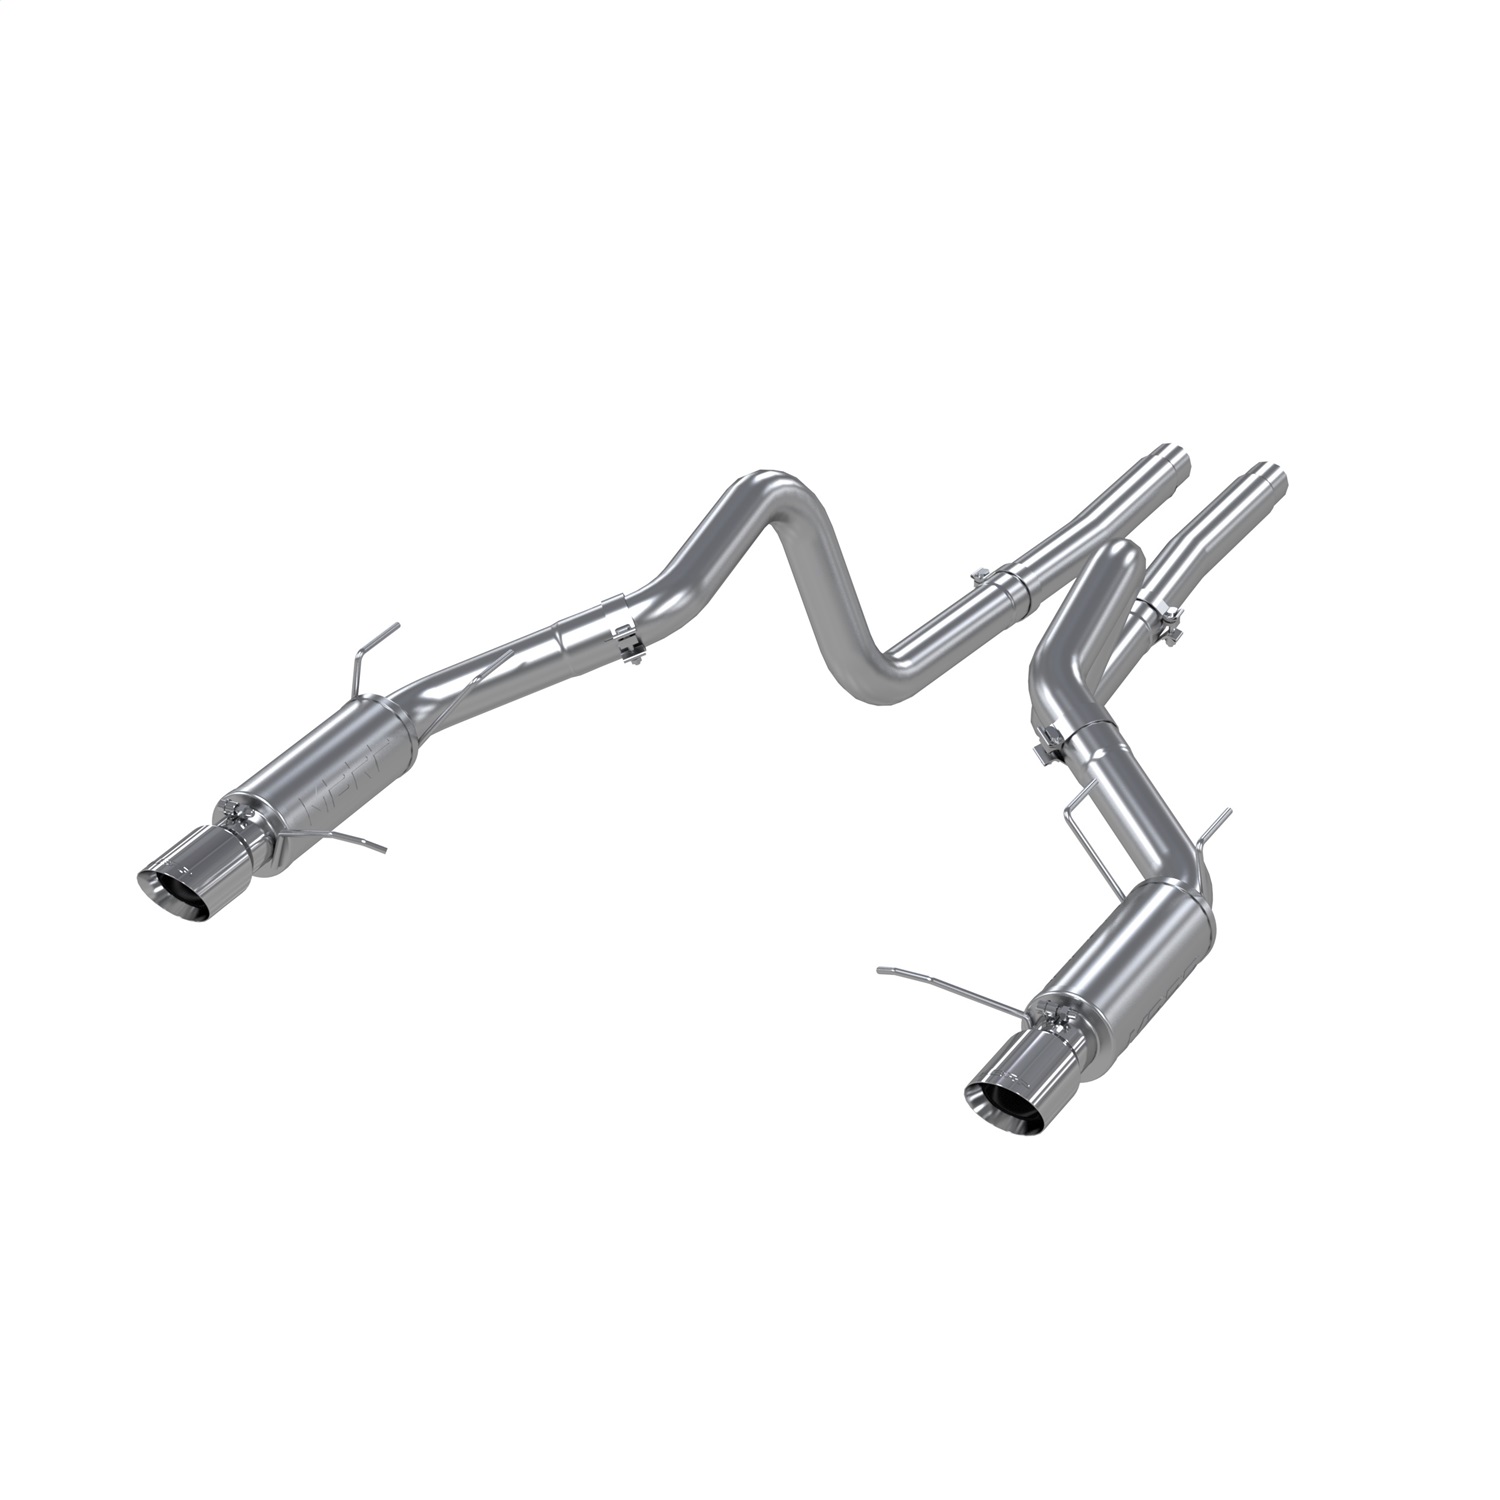 MBRP Exhaust S7264AL Armor Lite Cat Back Exhaust System Fits 11-14 Mustang